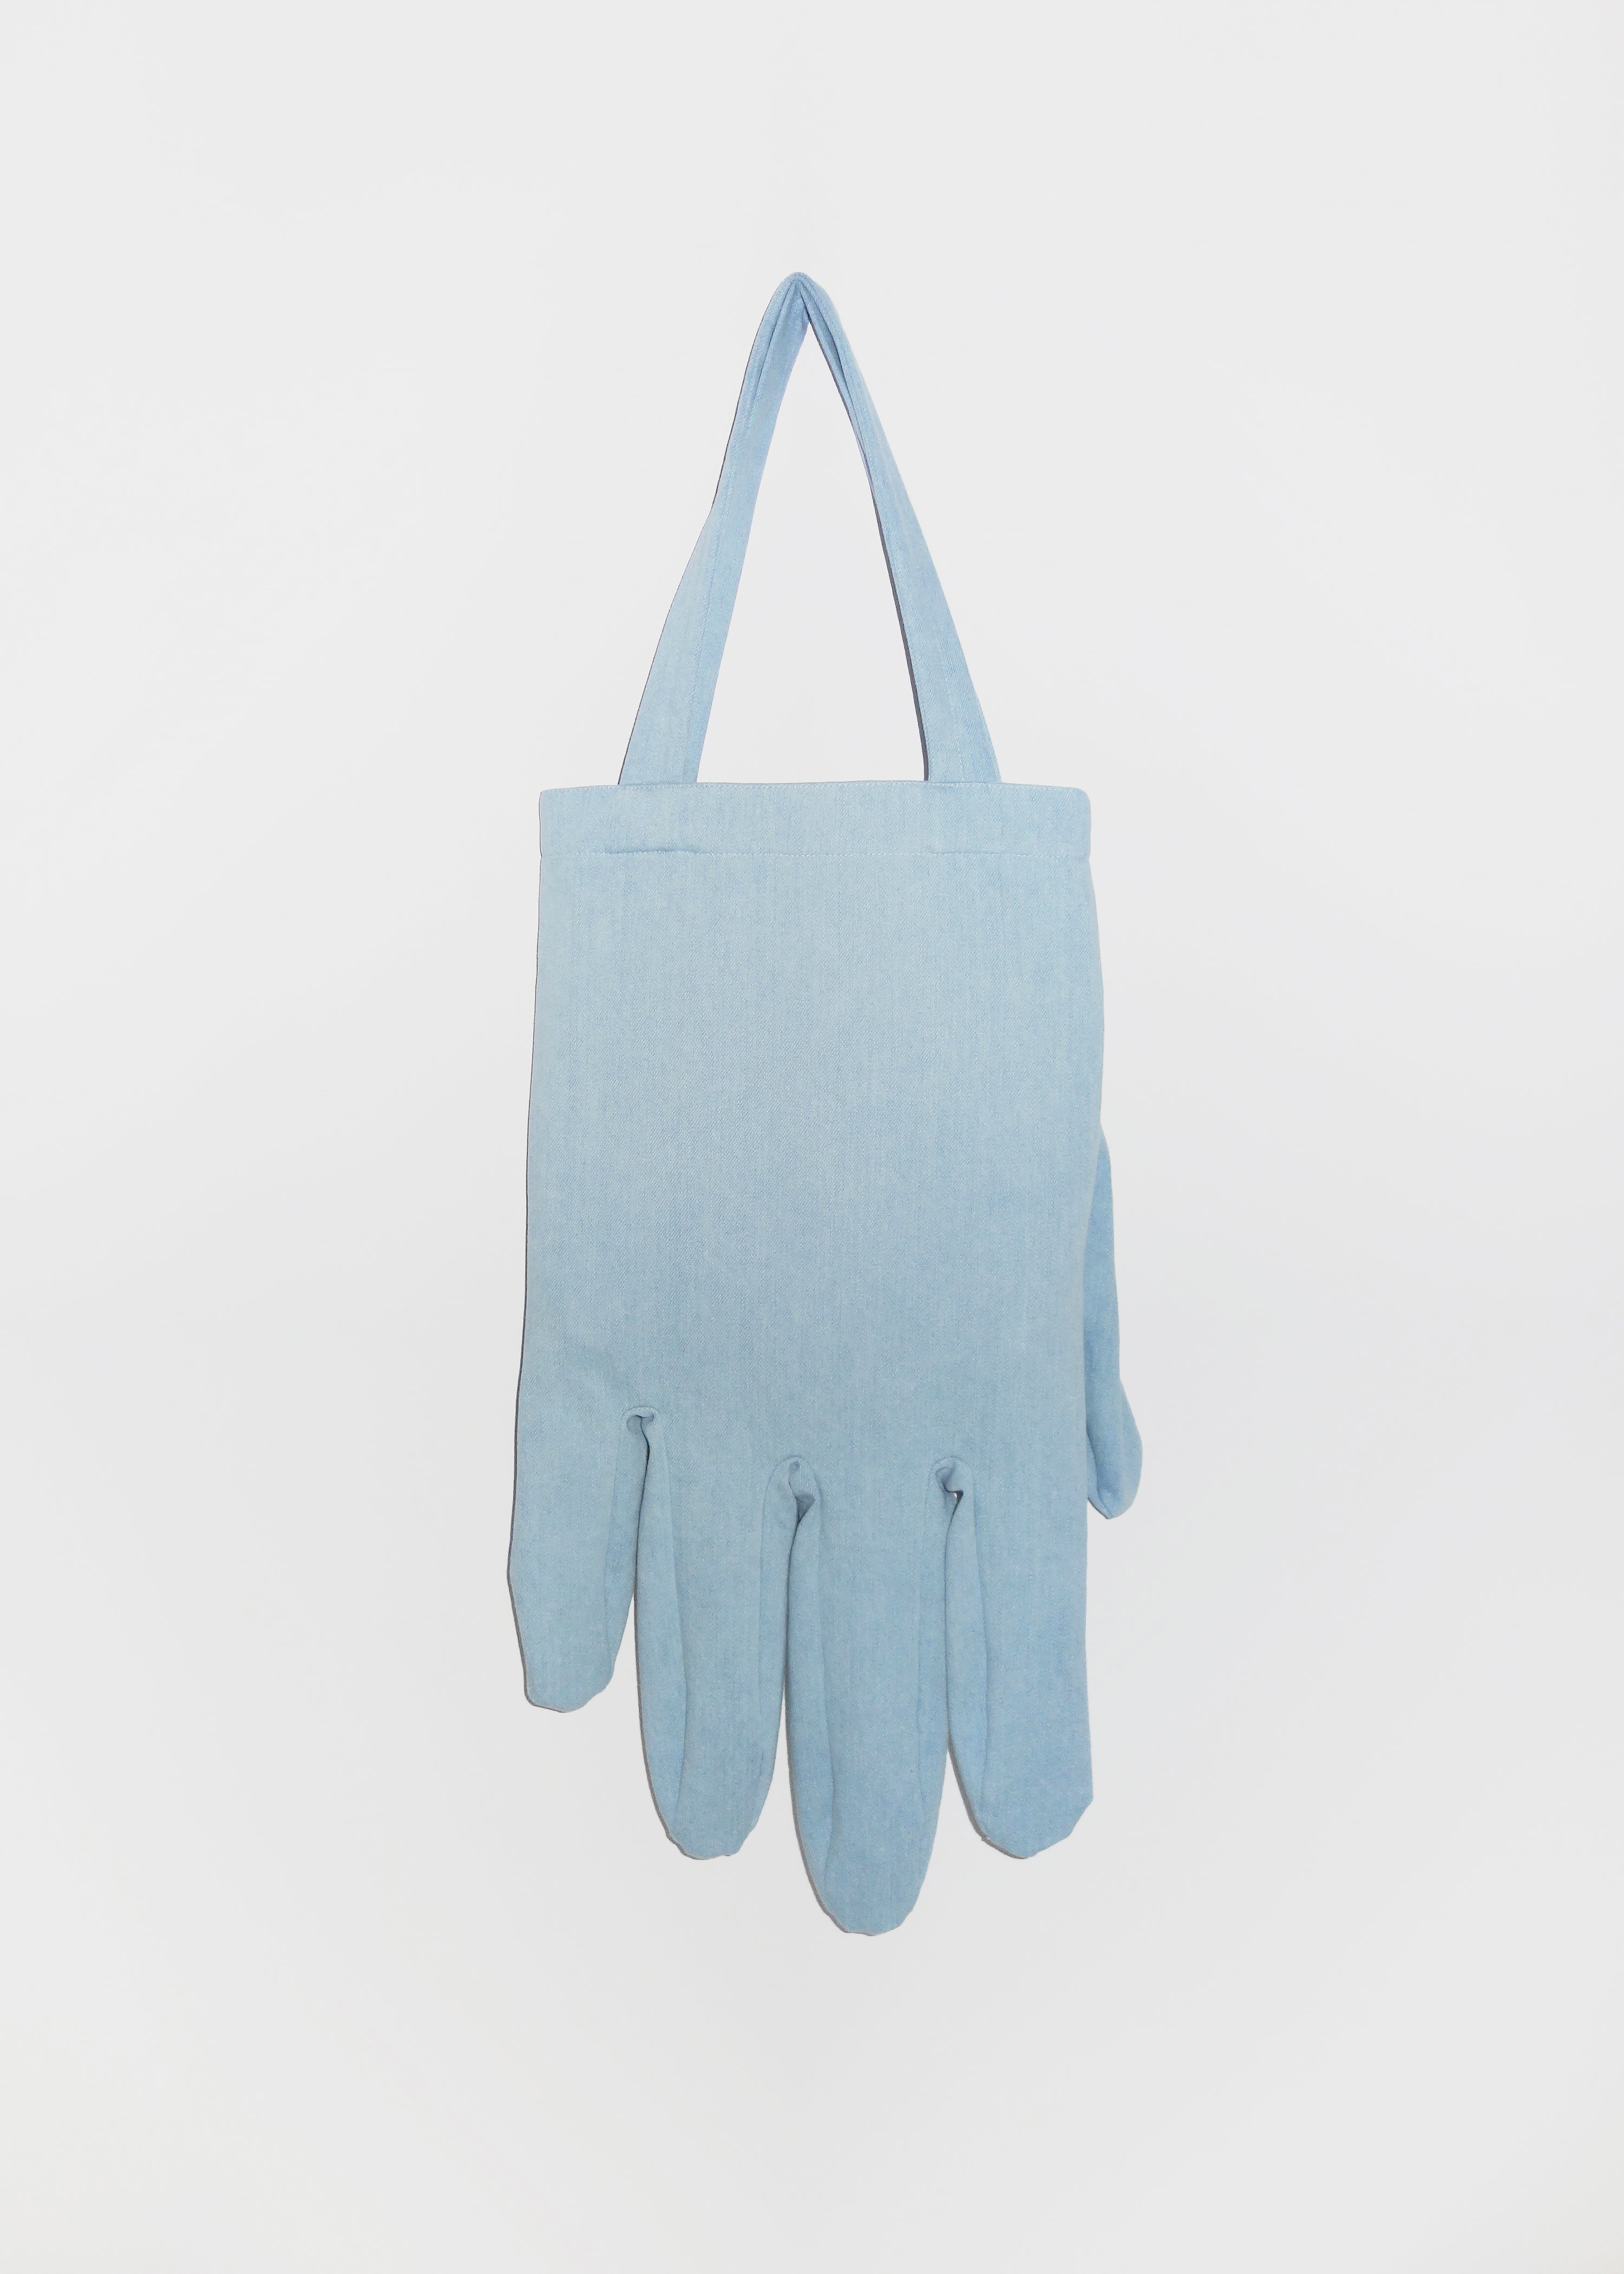 Right Hand Tote in Vintage Blue Denim